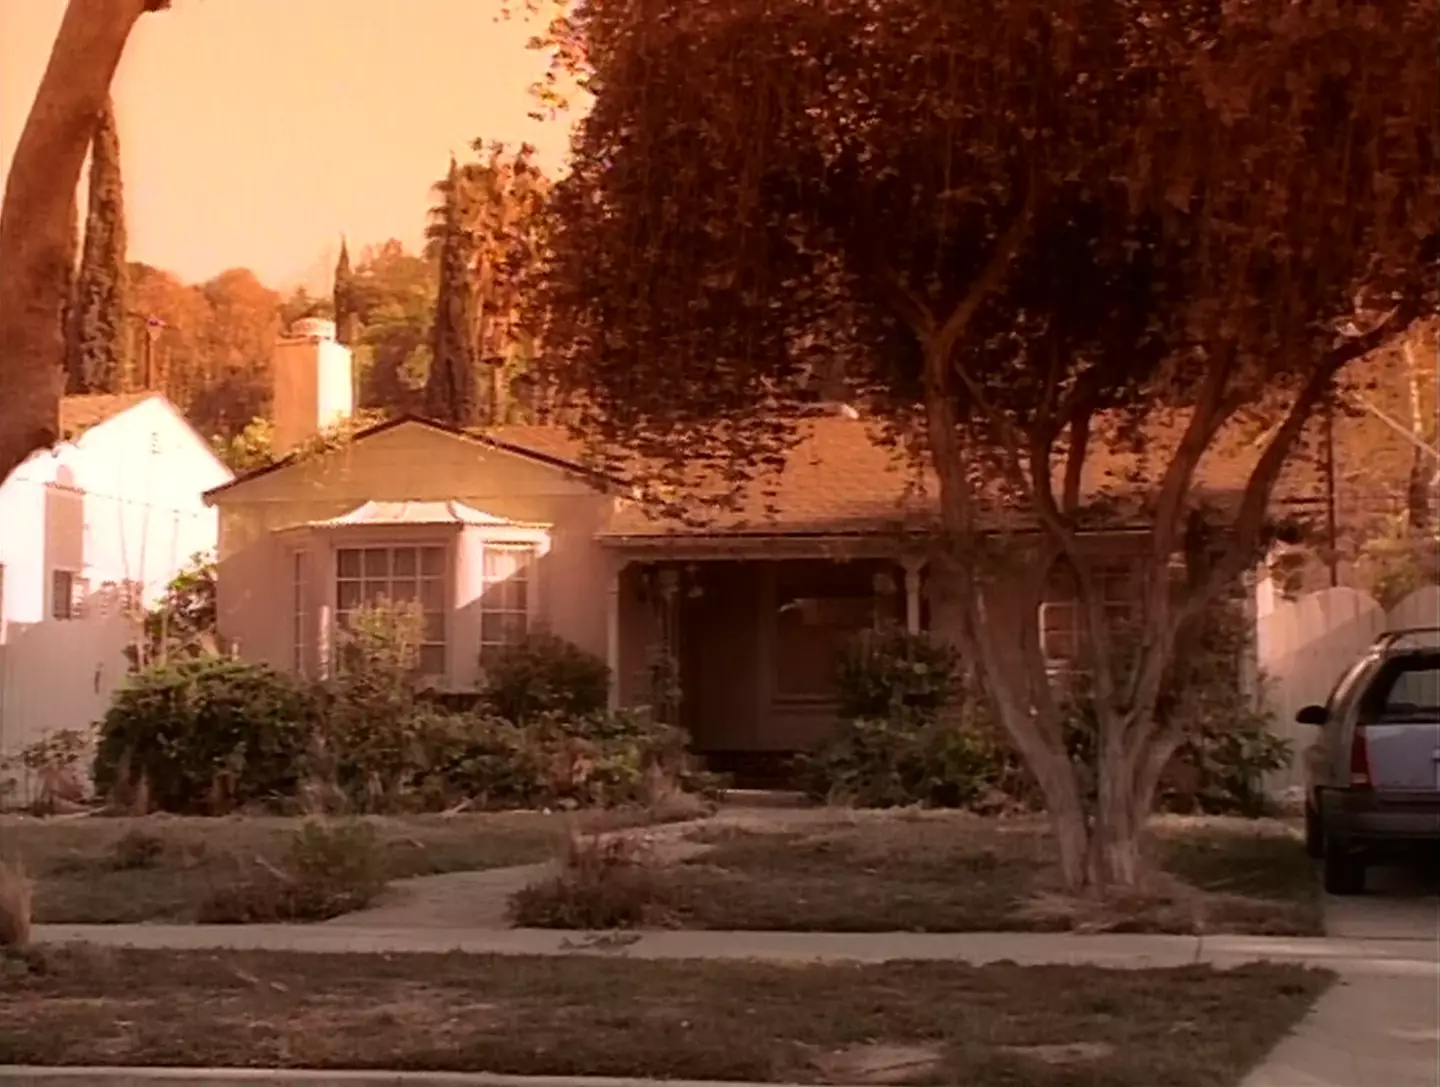 Here's the house shown in the series. (Disney)